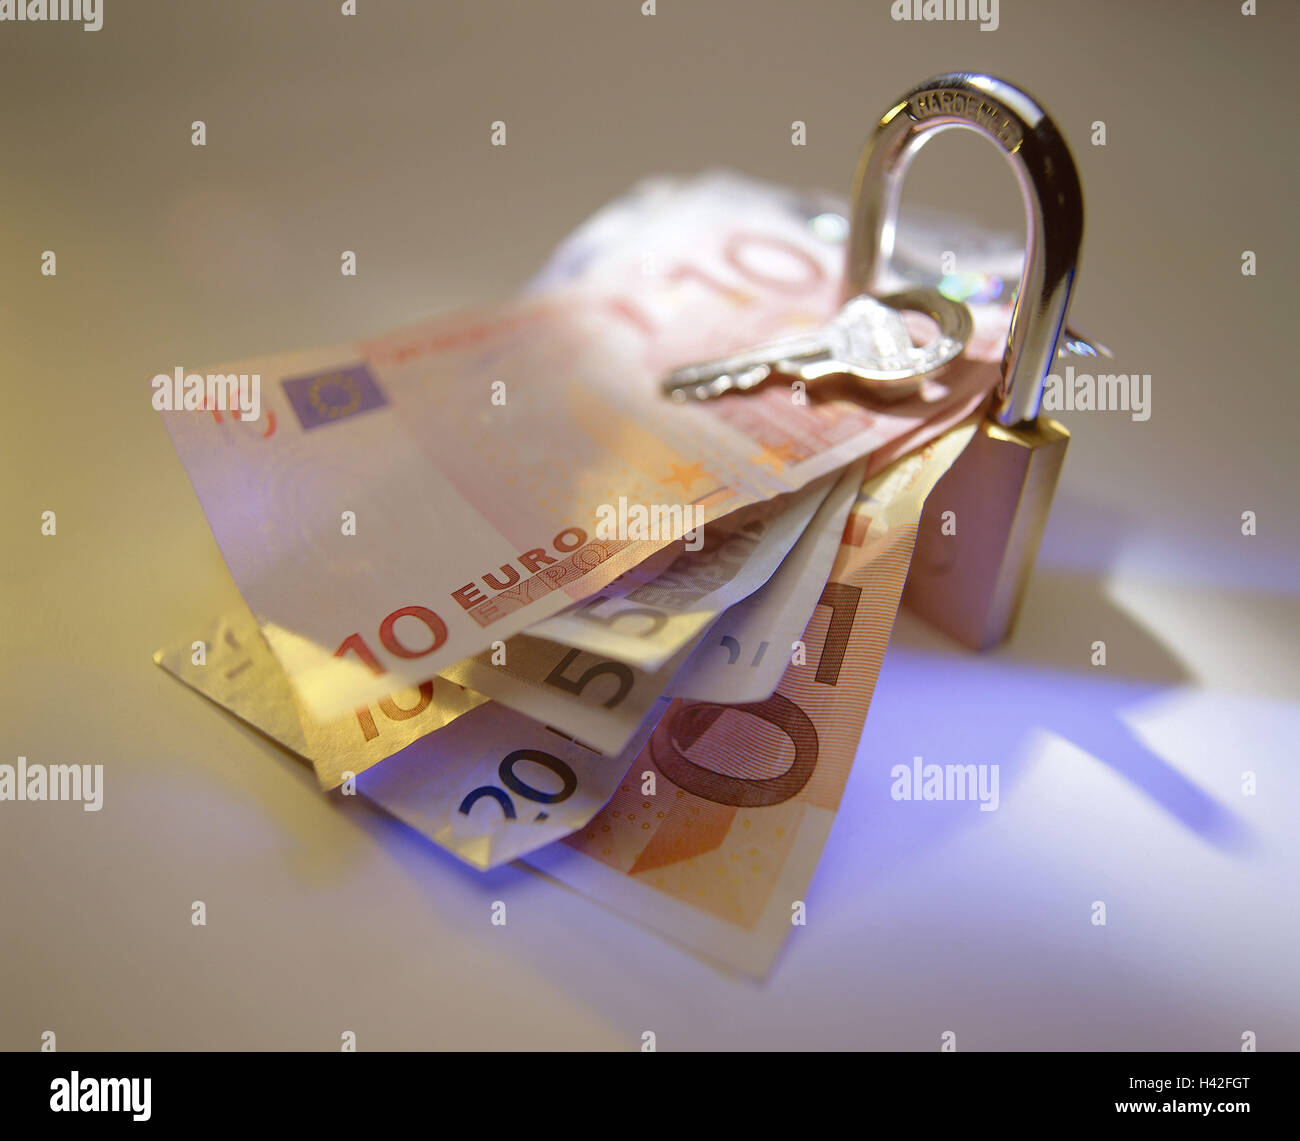 Padlock, bank notes, euro, key, blur security lock, security, stuck, hold on, clamp, saving, saving, economy measure, banknotes, meanses payment, money, notes, currency, monetary policy, conception, Still life, product photography, studio Stock Photo